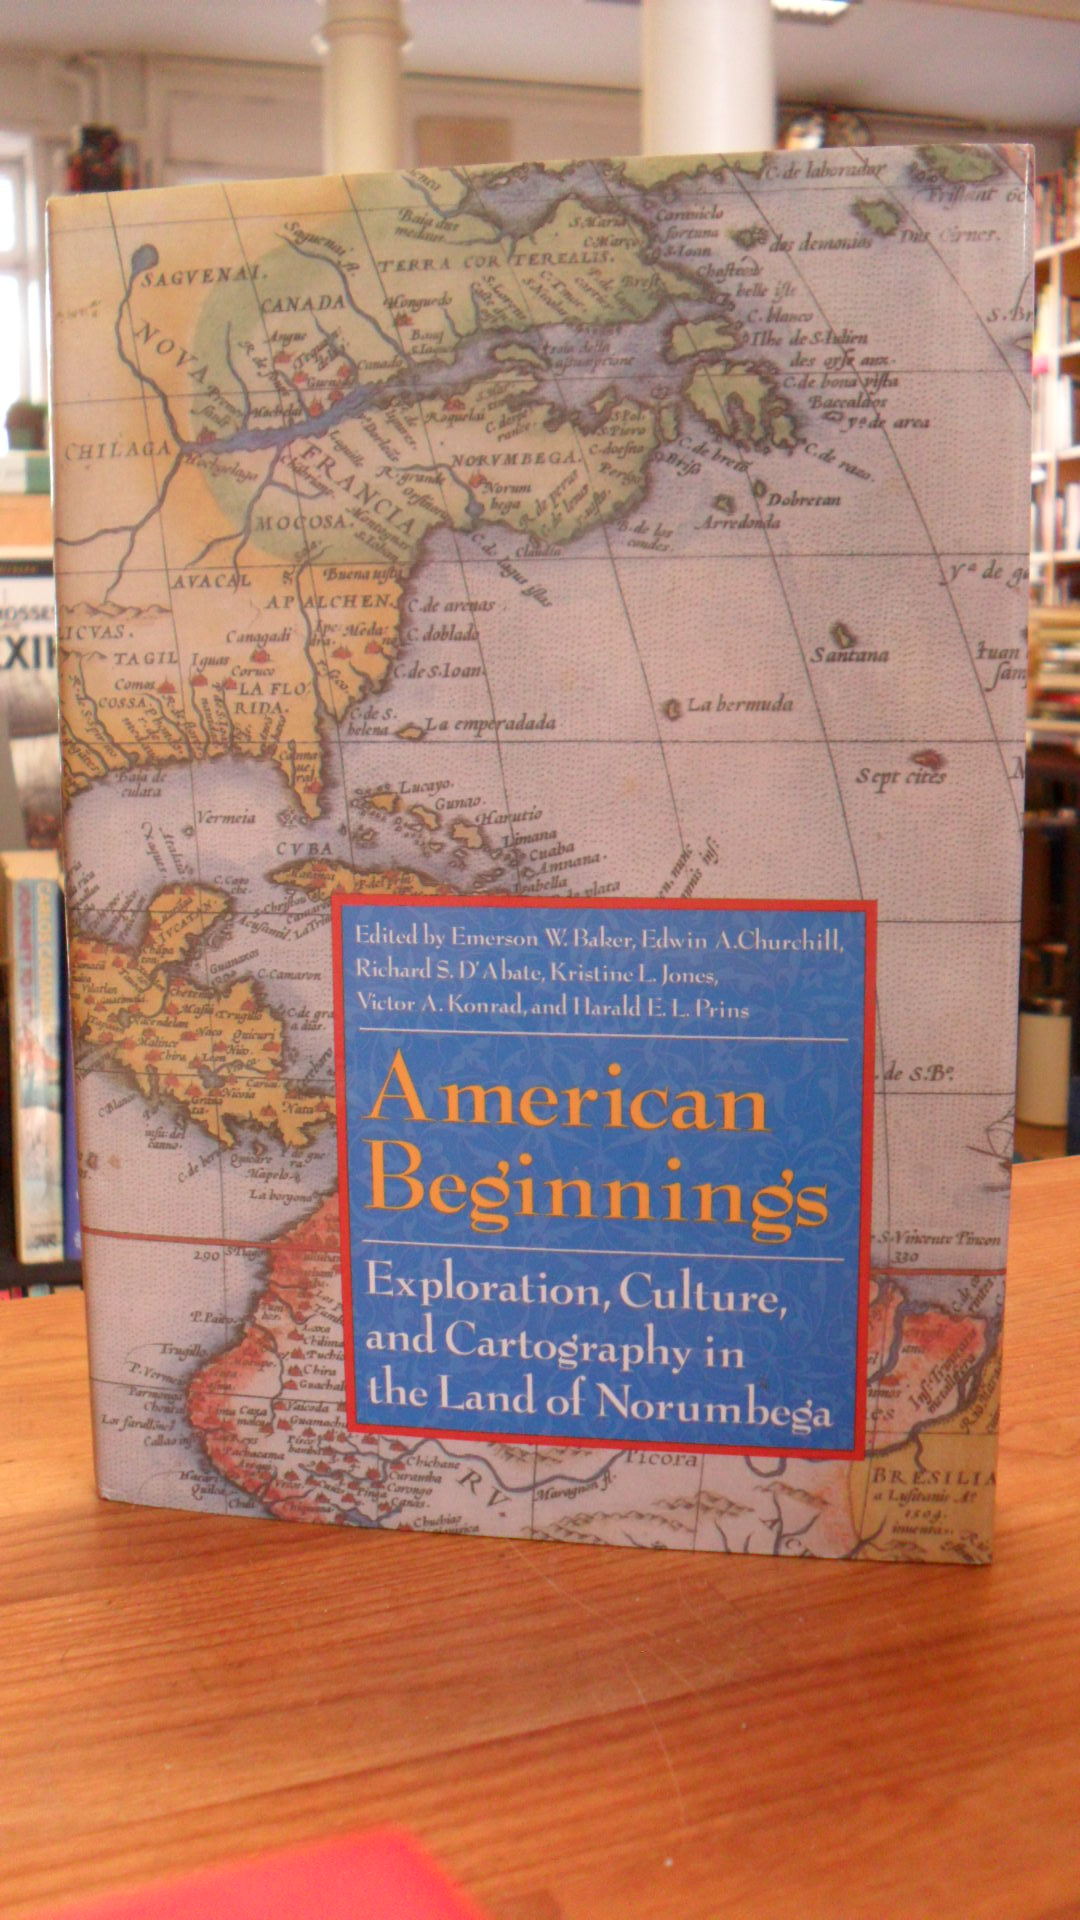 American beginnings – Exploration, Culture, and Cartography in the Land of Norum